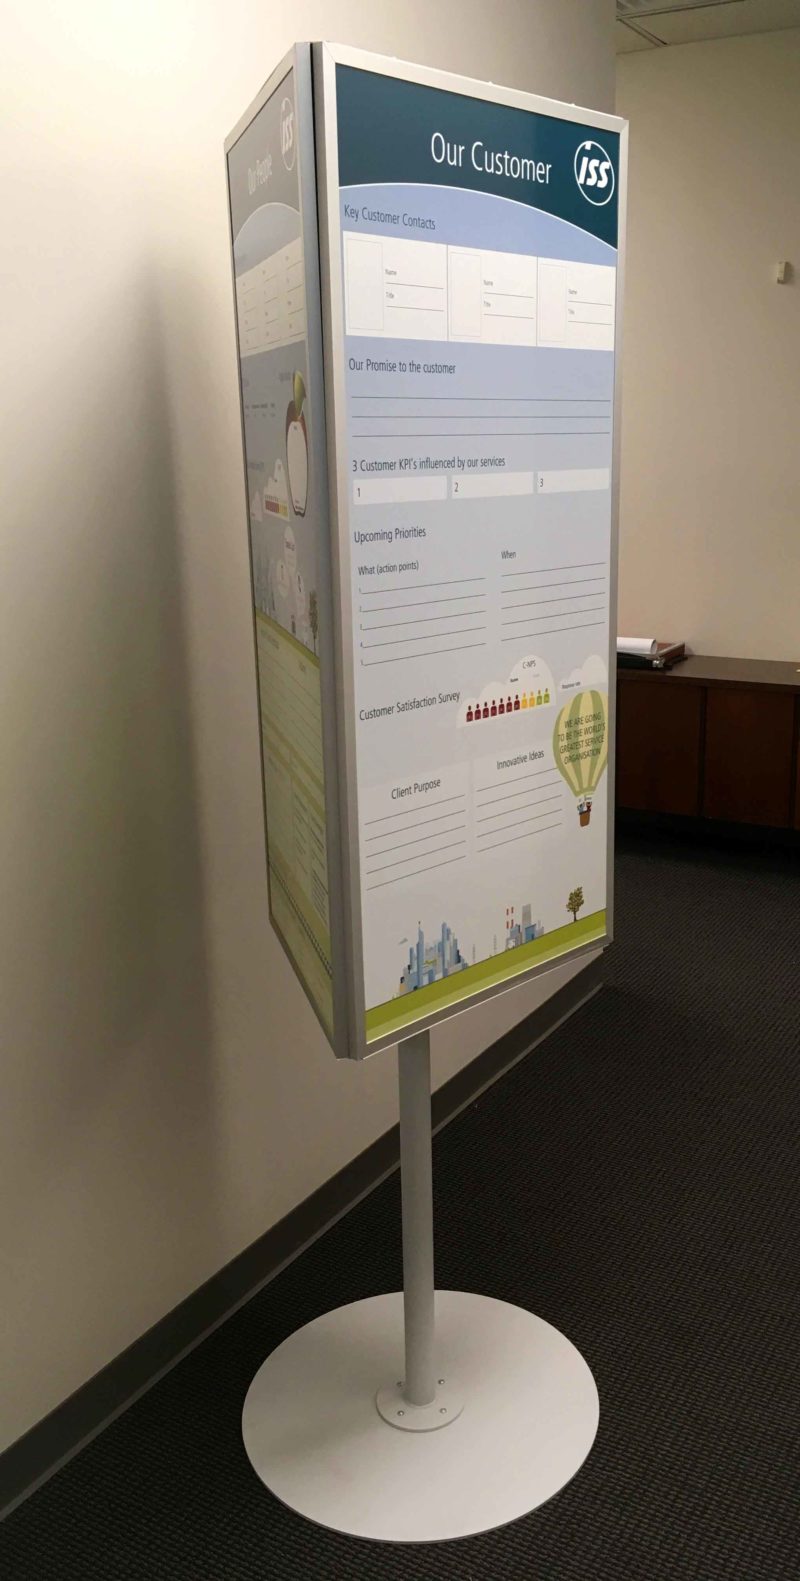 ISS Custom 3-sided huddleboard stand - magnetic 22"w x 48"h custom printed on 3 sides whiteboards